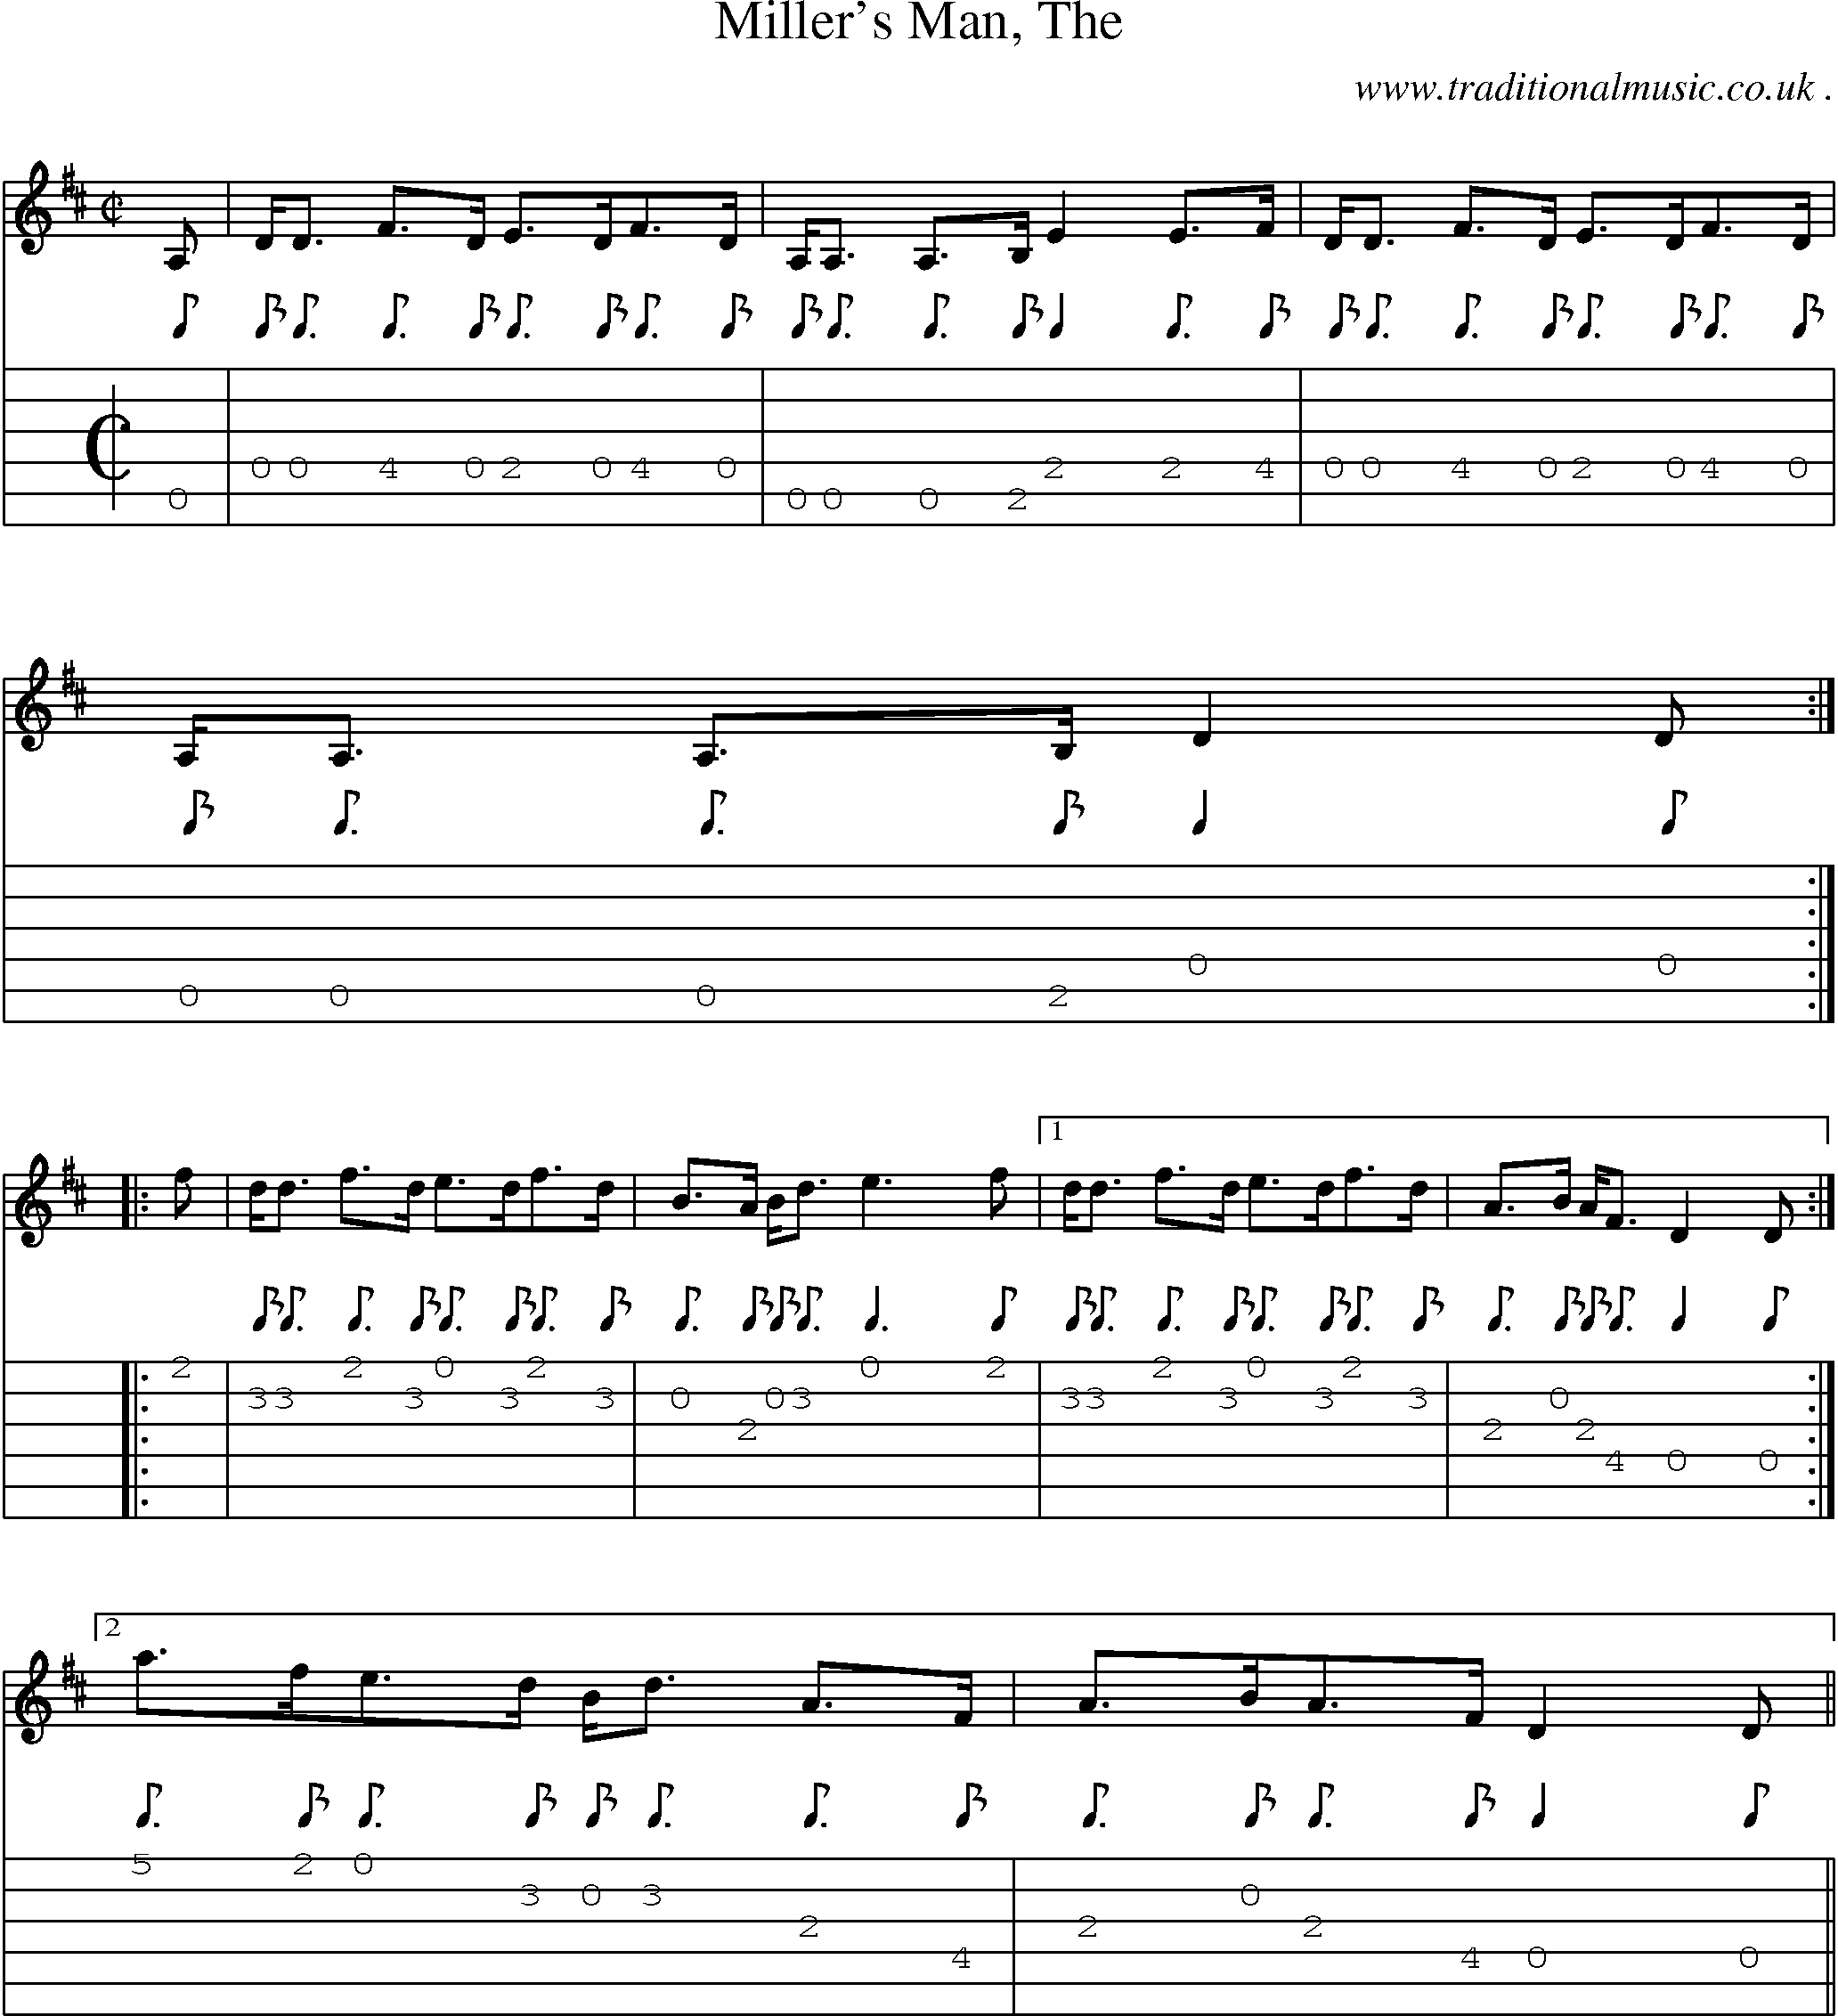 Sheet-music  score, Chords and Guitar Tabs for Millers Man The